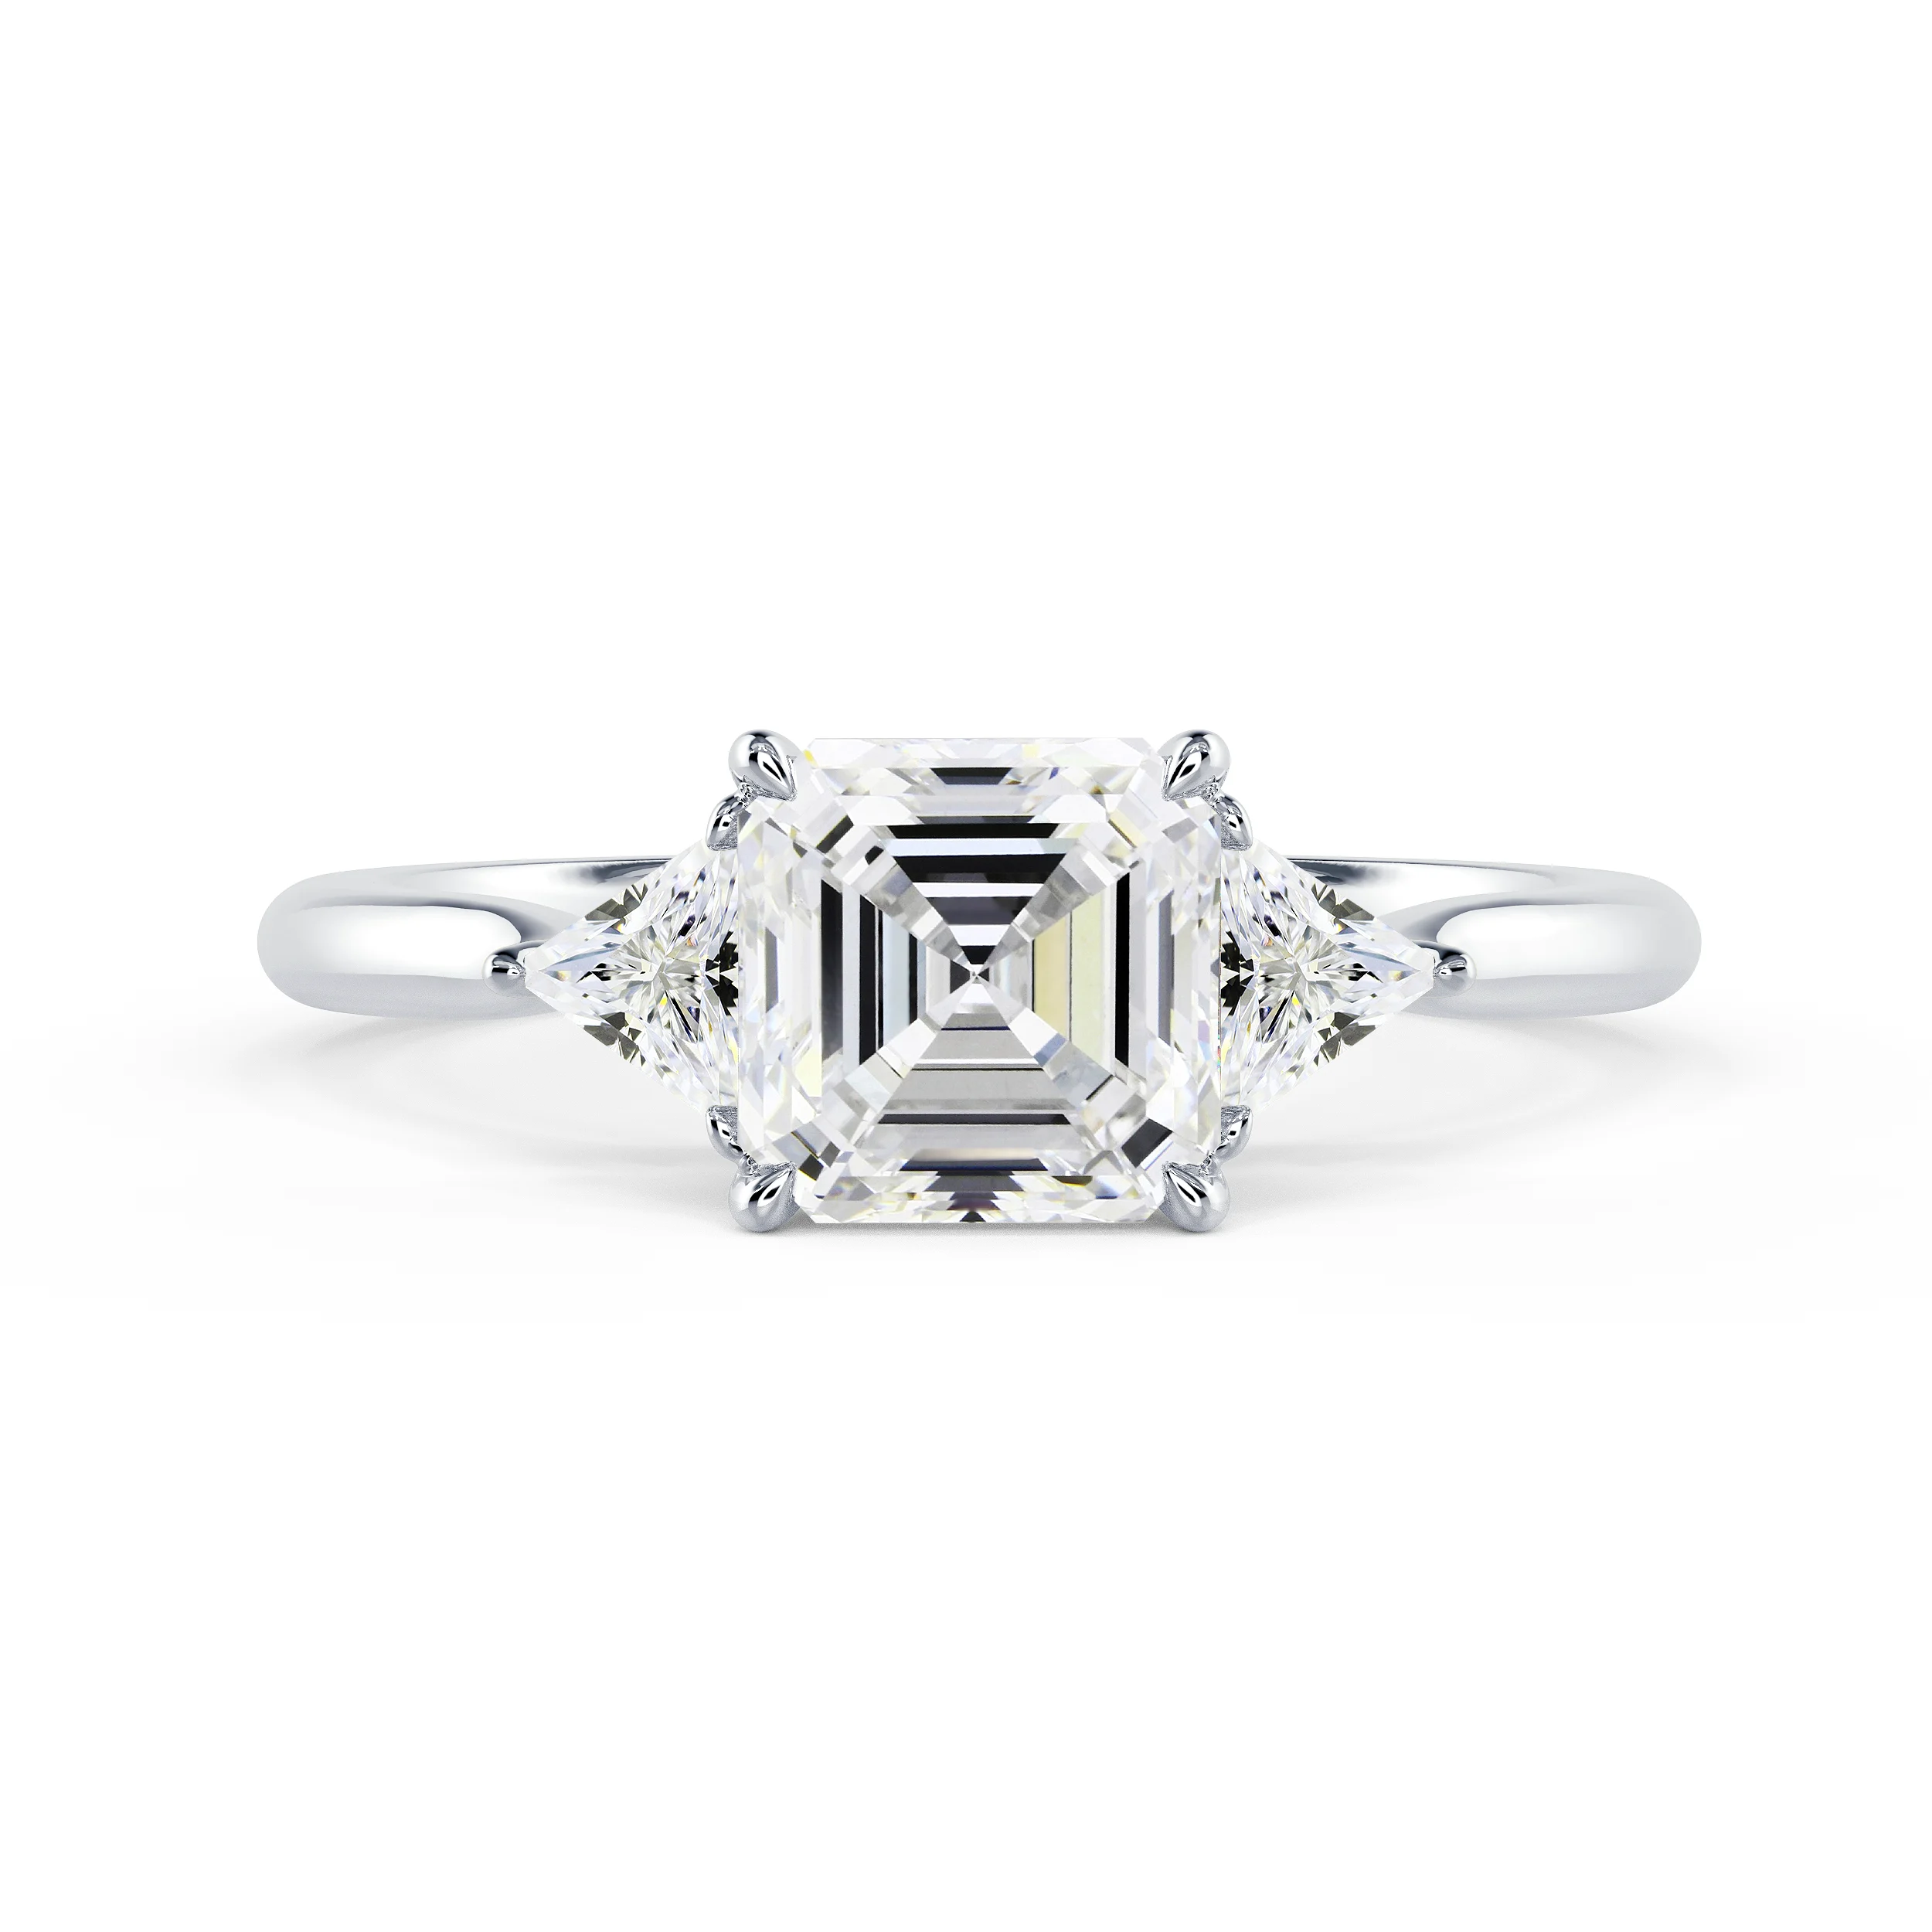 White Gold Asscher and Trillion Setting featuring Lab Grown Diamonds (Main View)